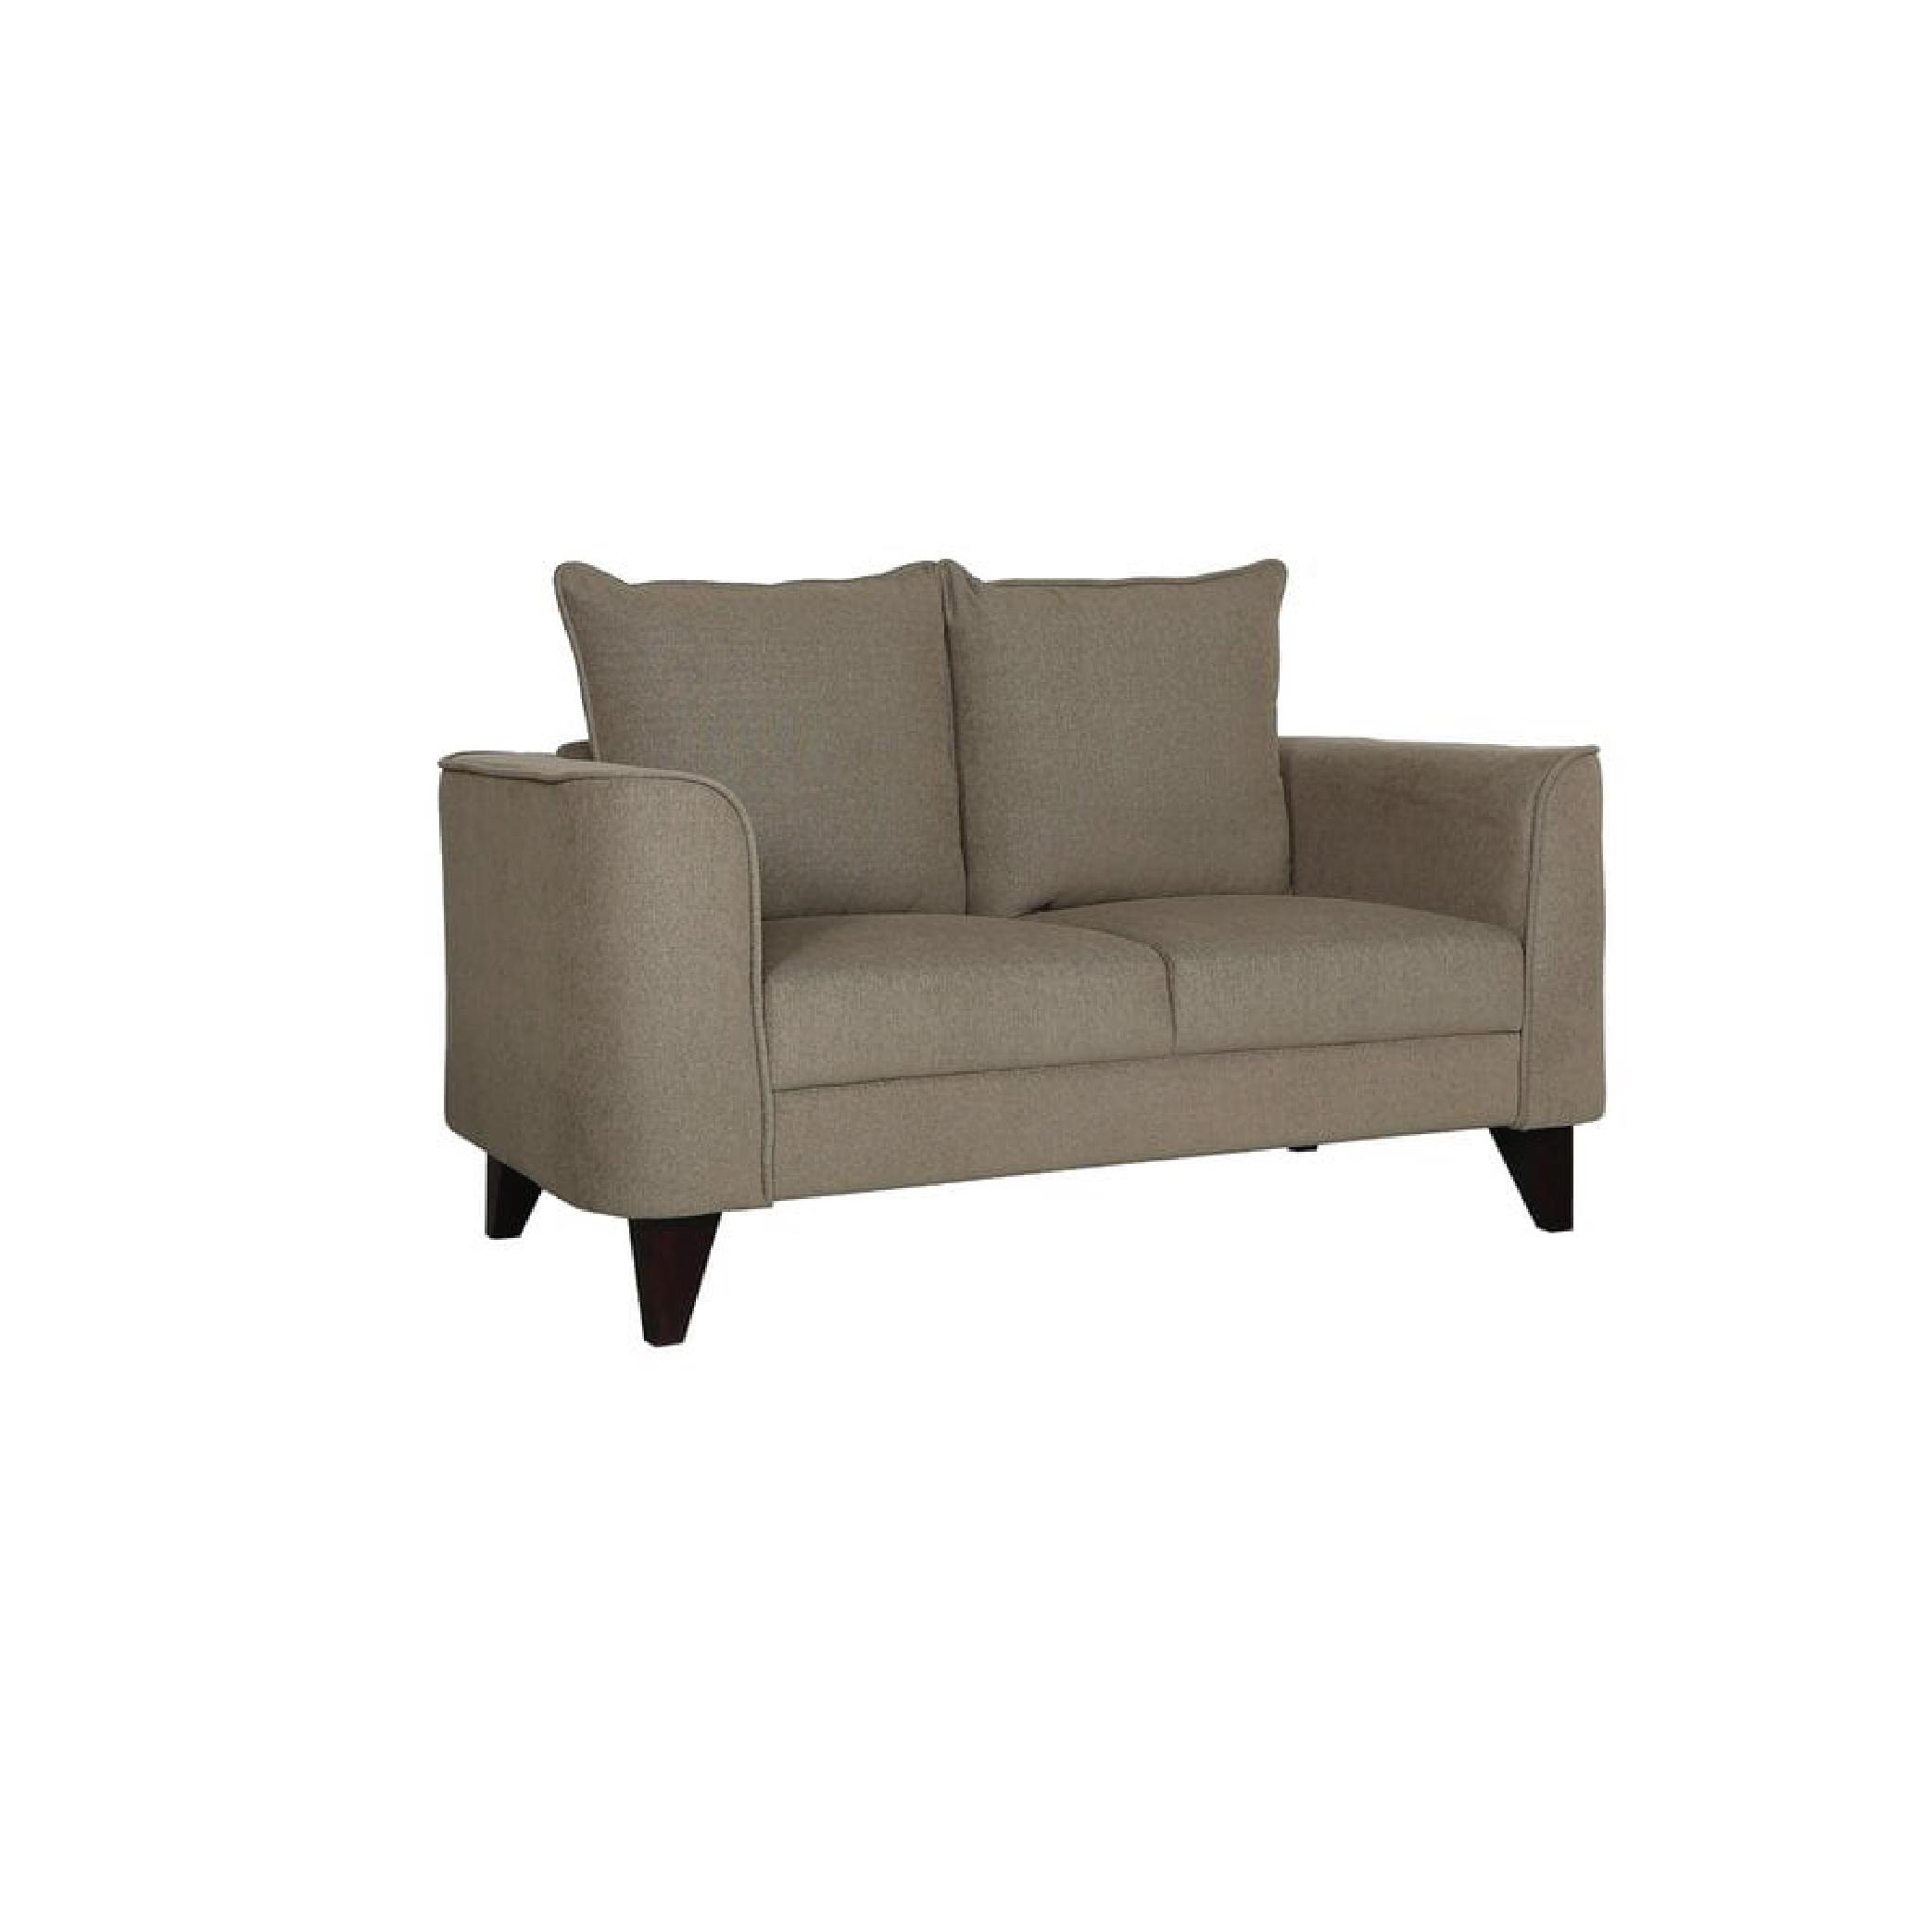 Sessa Two Seater Sofa in Sandy Brown Colour